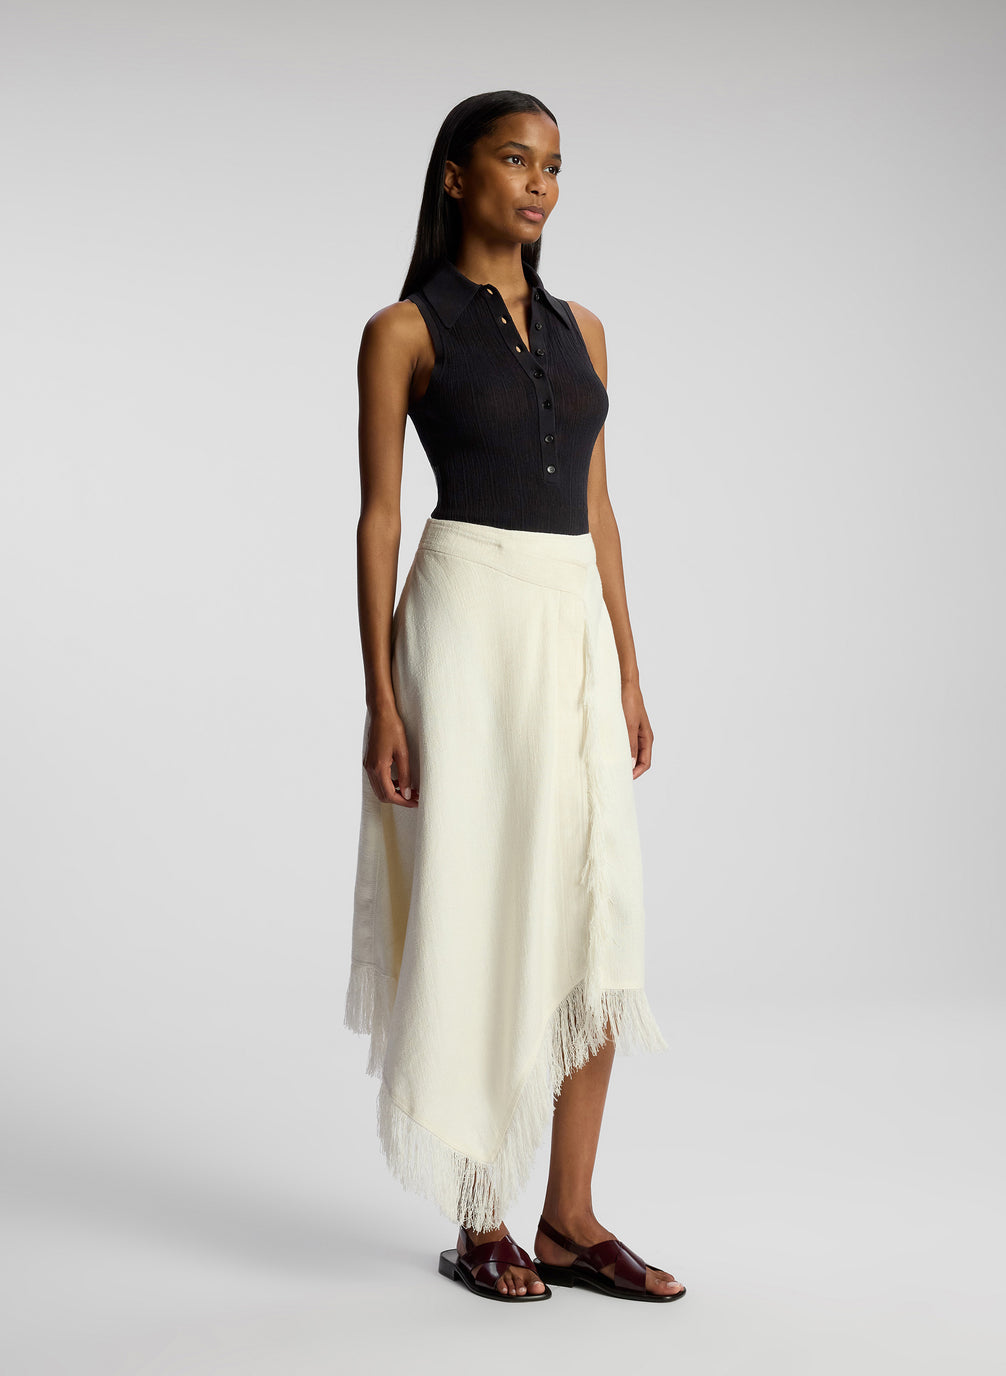 side view of woman wearing black collared sleeveless shirt and white skirt